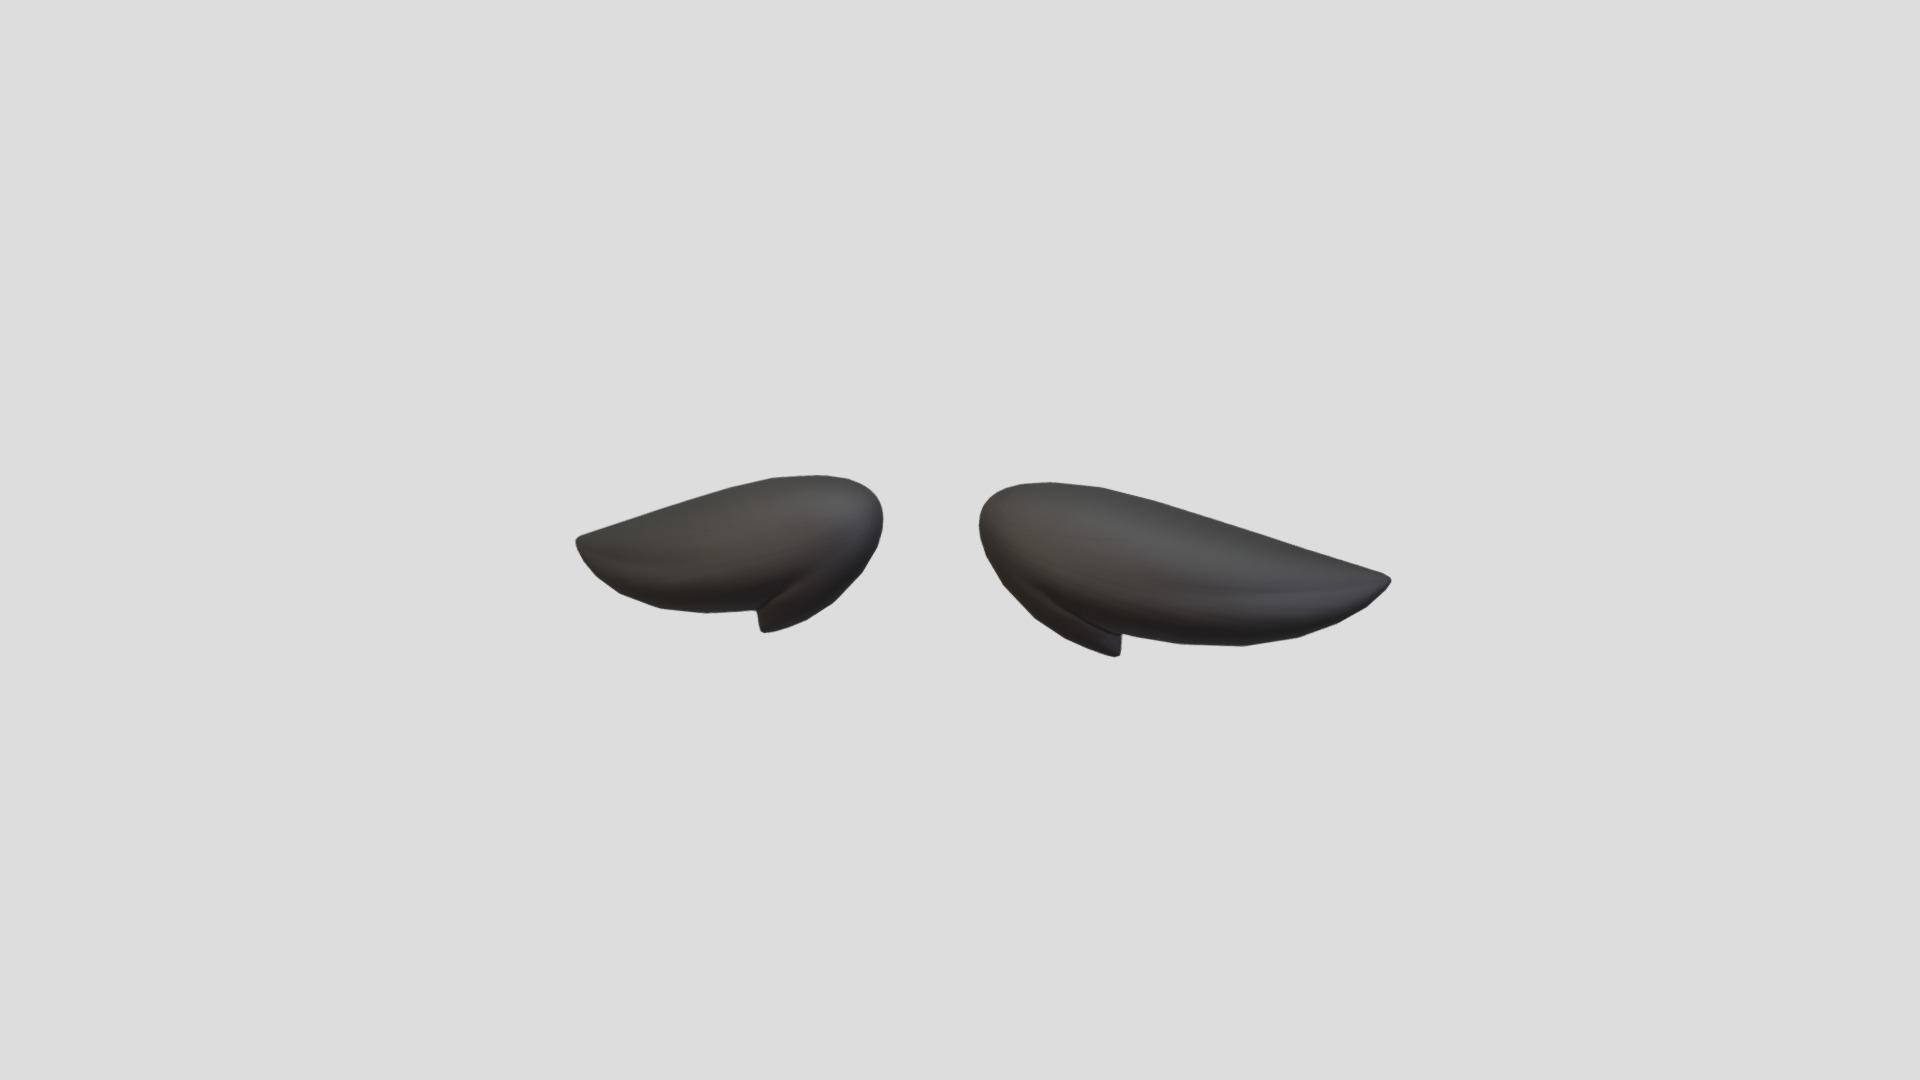 3D model Mustache 06 - This is a 3D model of the Mustache 06. The 3D model is about a group of black objects.